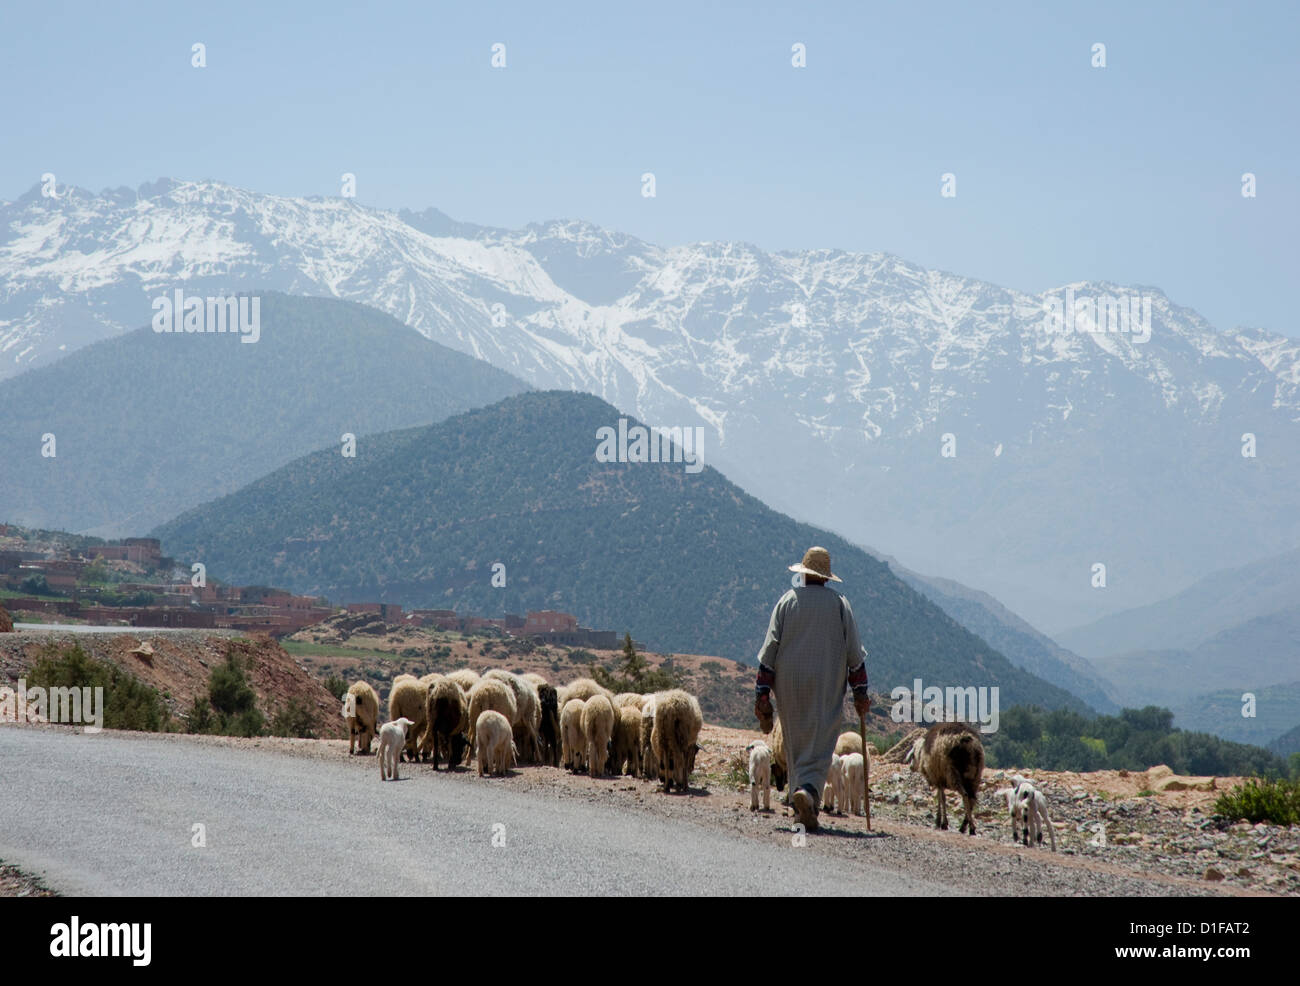 A local man herding sheep on a road with the Atlas Mountains in the background, Morocco, North Africa, Africa Stock Photo